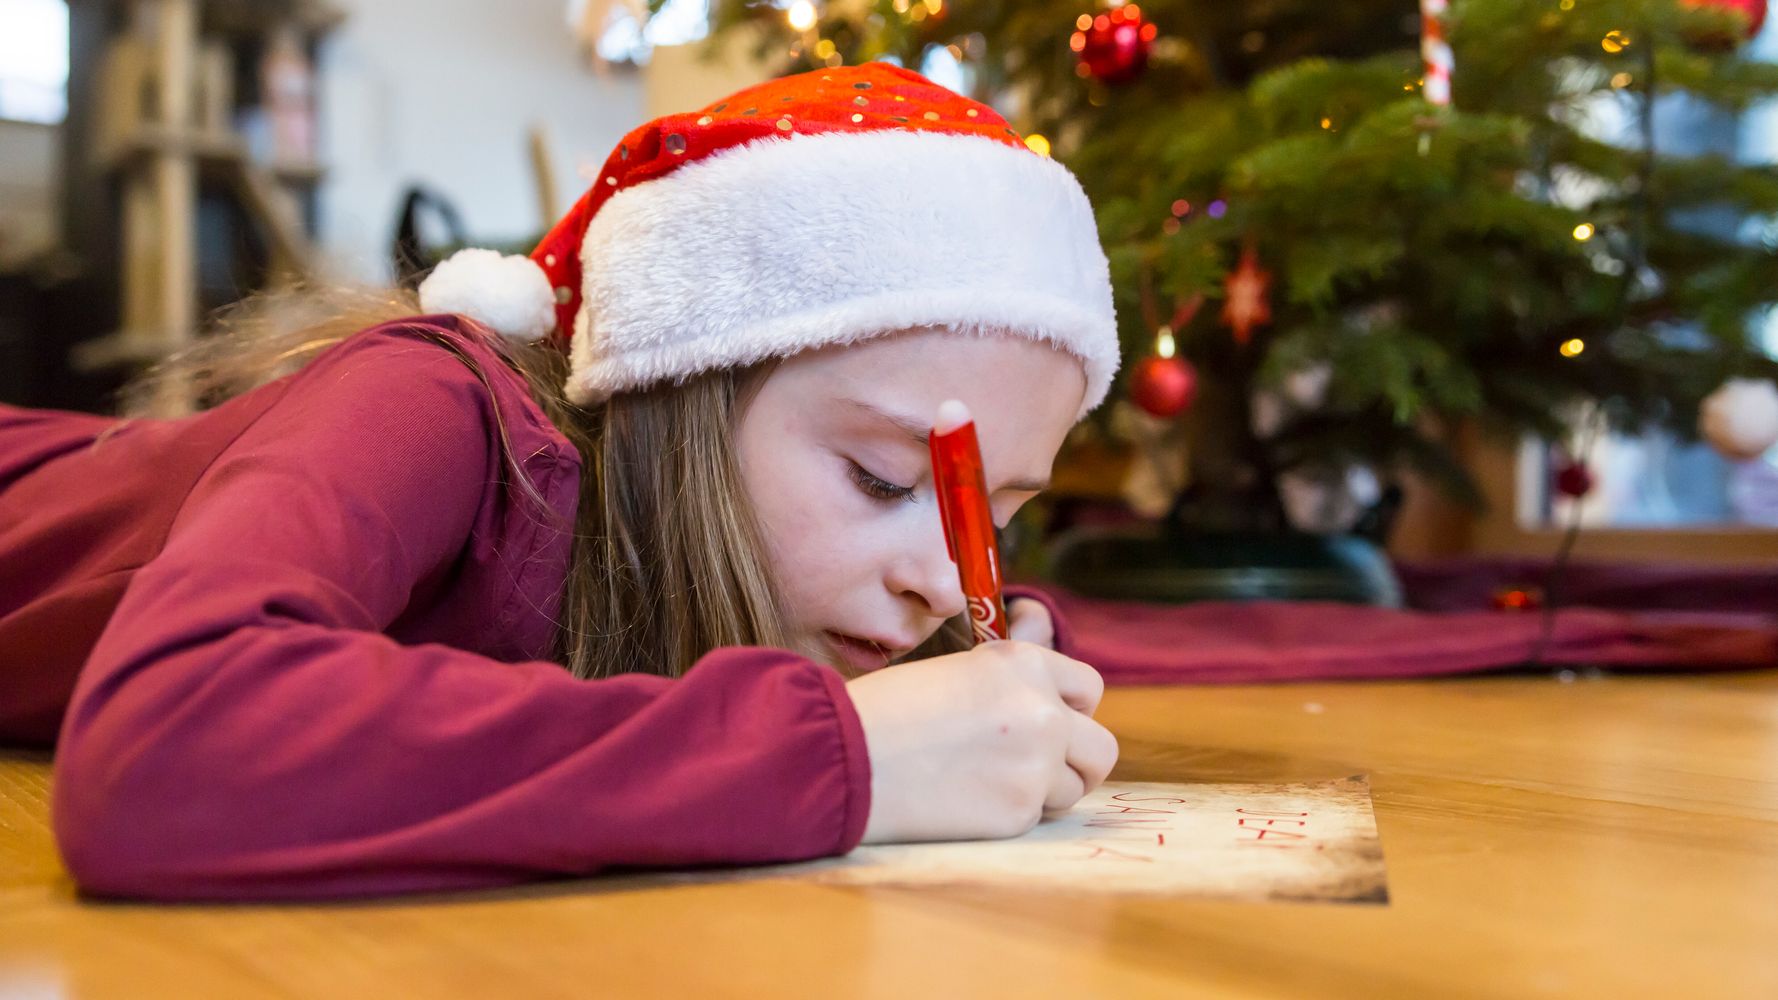 kids-should-still-mail-letters-to-santa-canada-post-says-amid-strike-huffpost-canada-parents